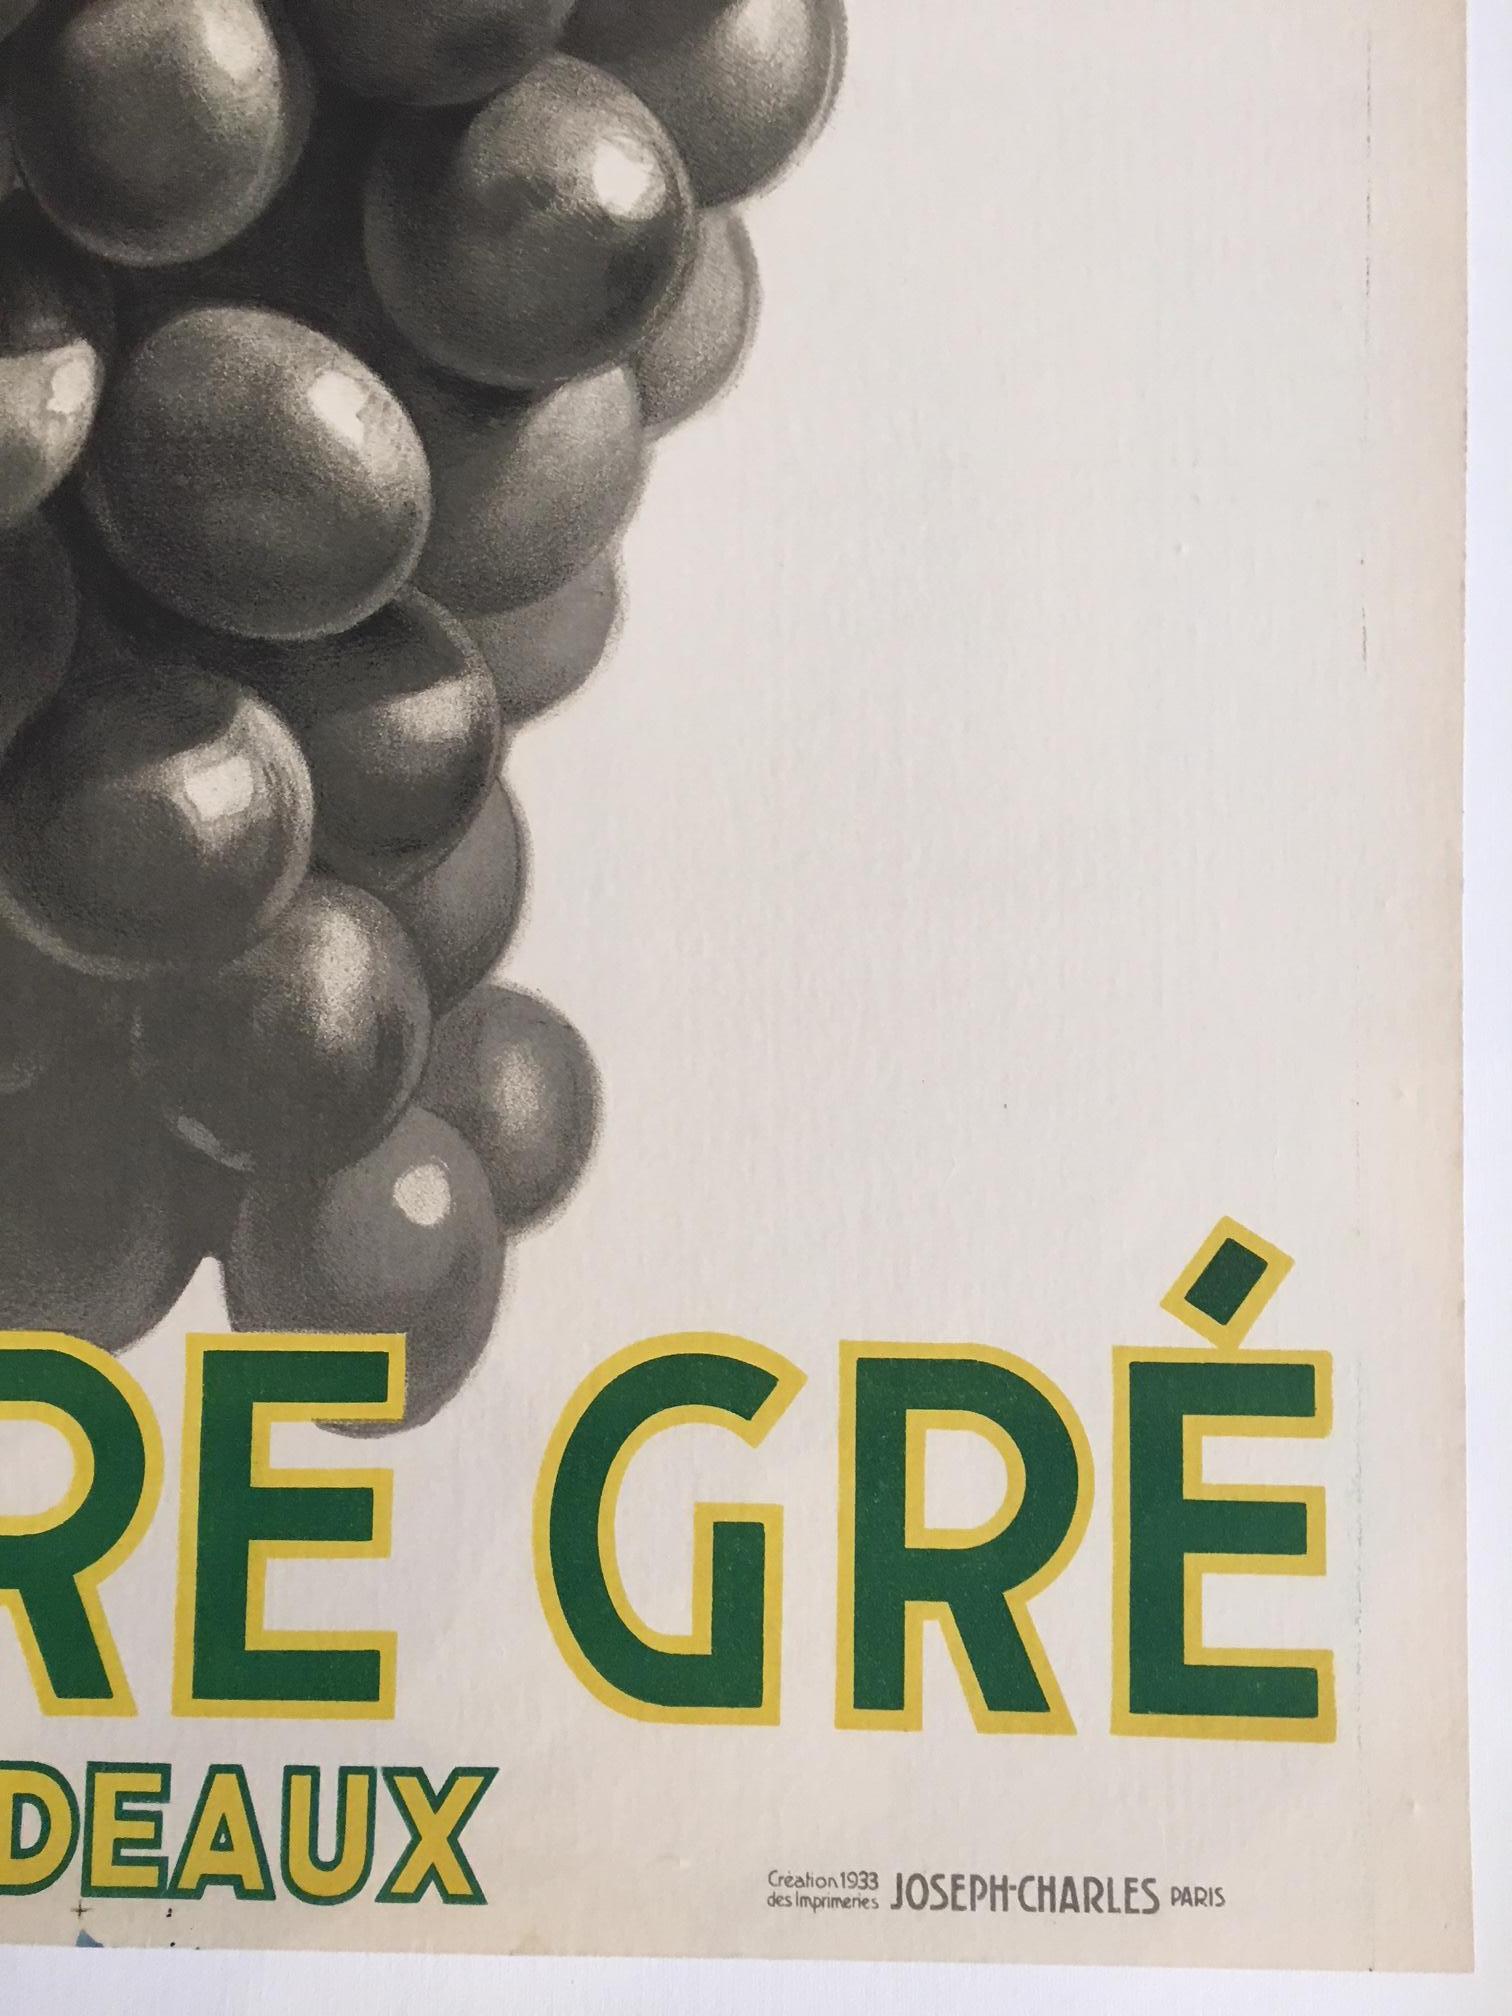 Original Vintage French Art Deco Wine Poster, Soufre Gre, 1933 by Leon Dupin 1